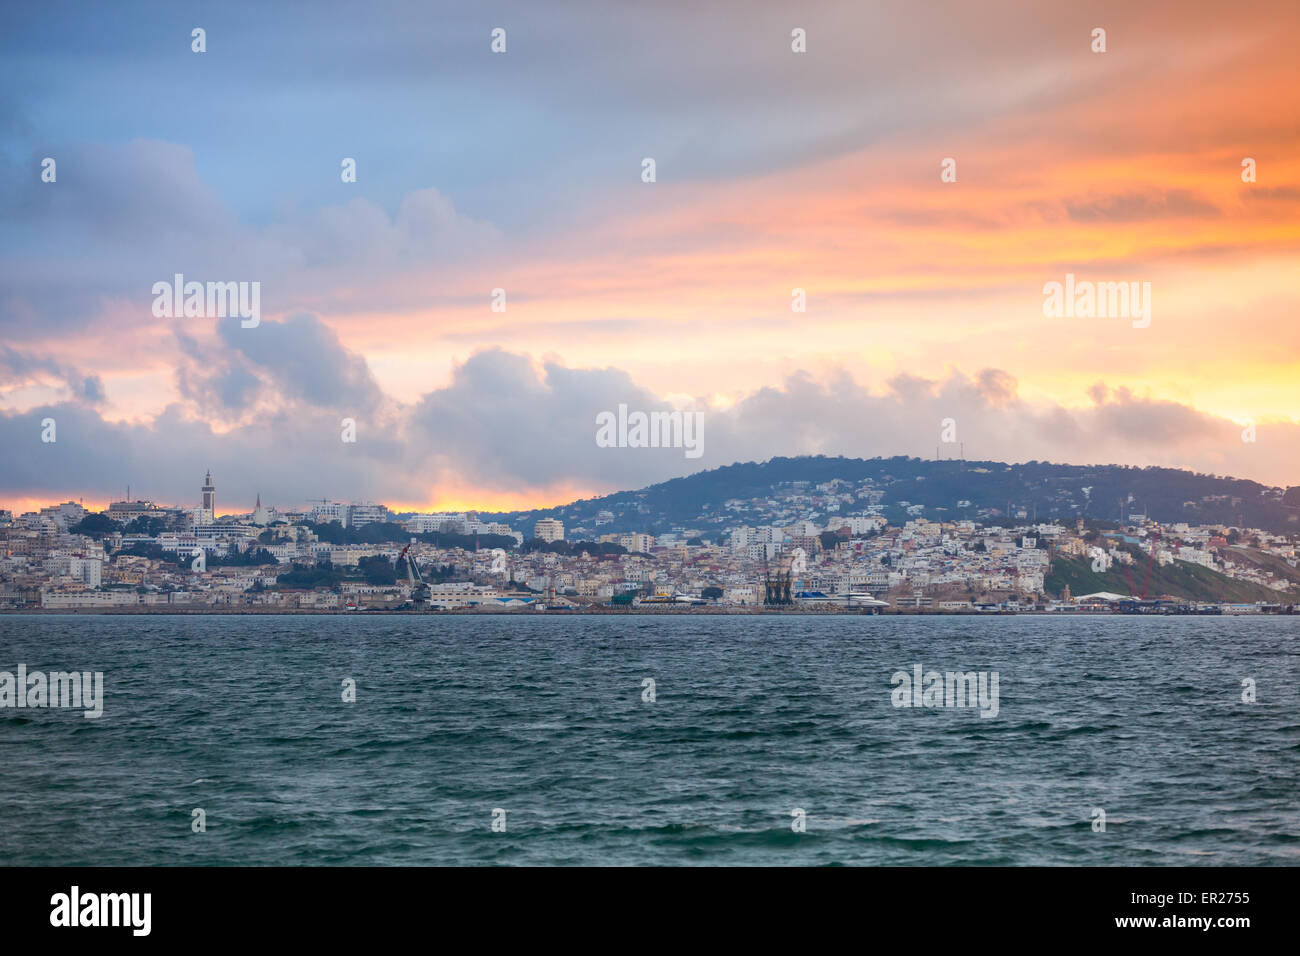 Bright sunset sky over Tangier city, Morocco, Africa Stock Photo